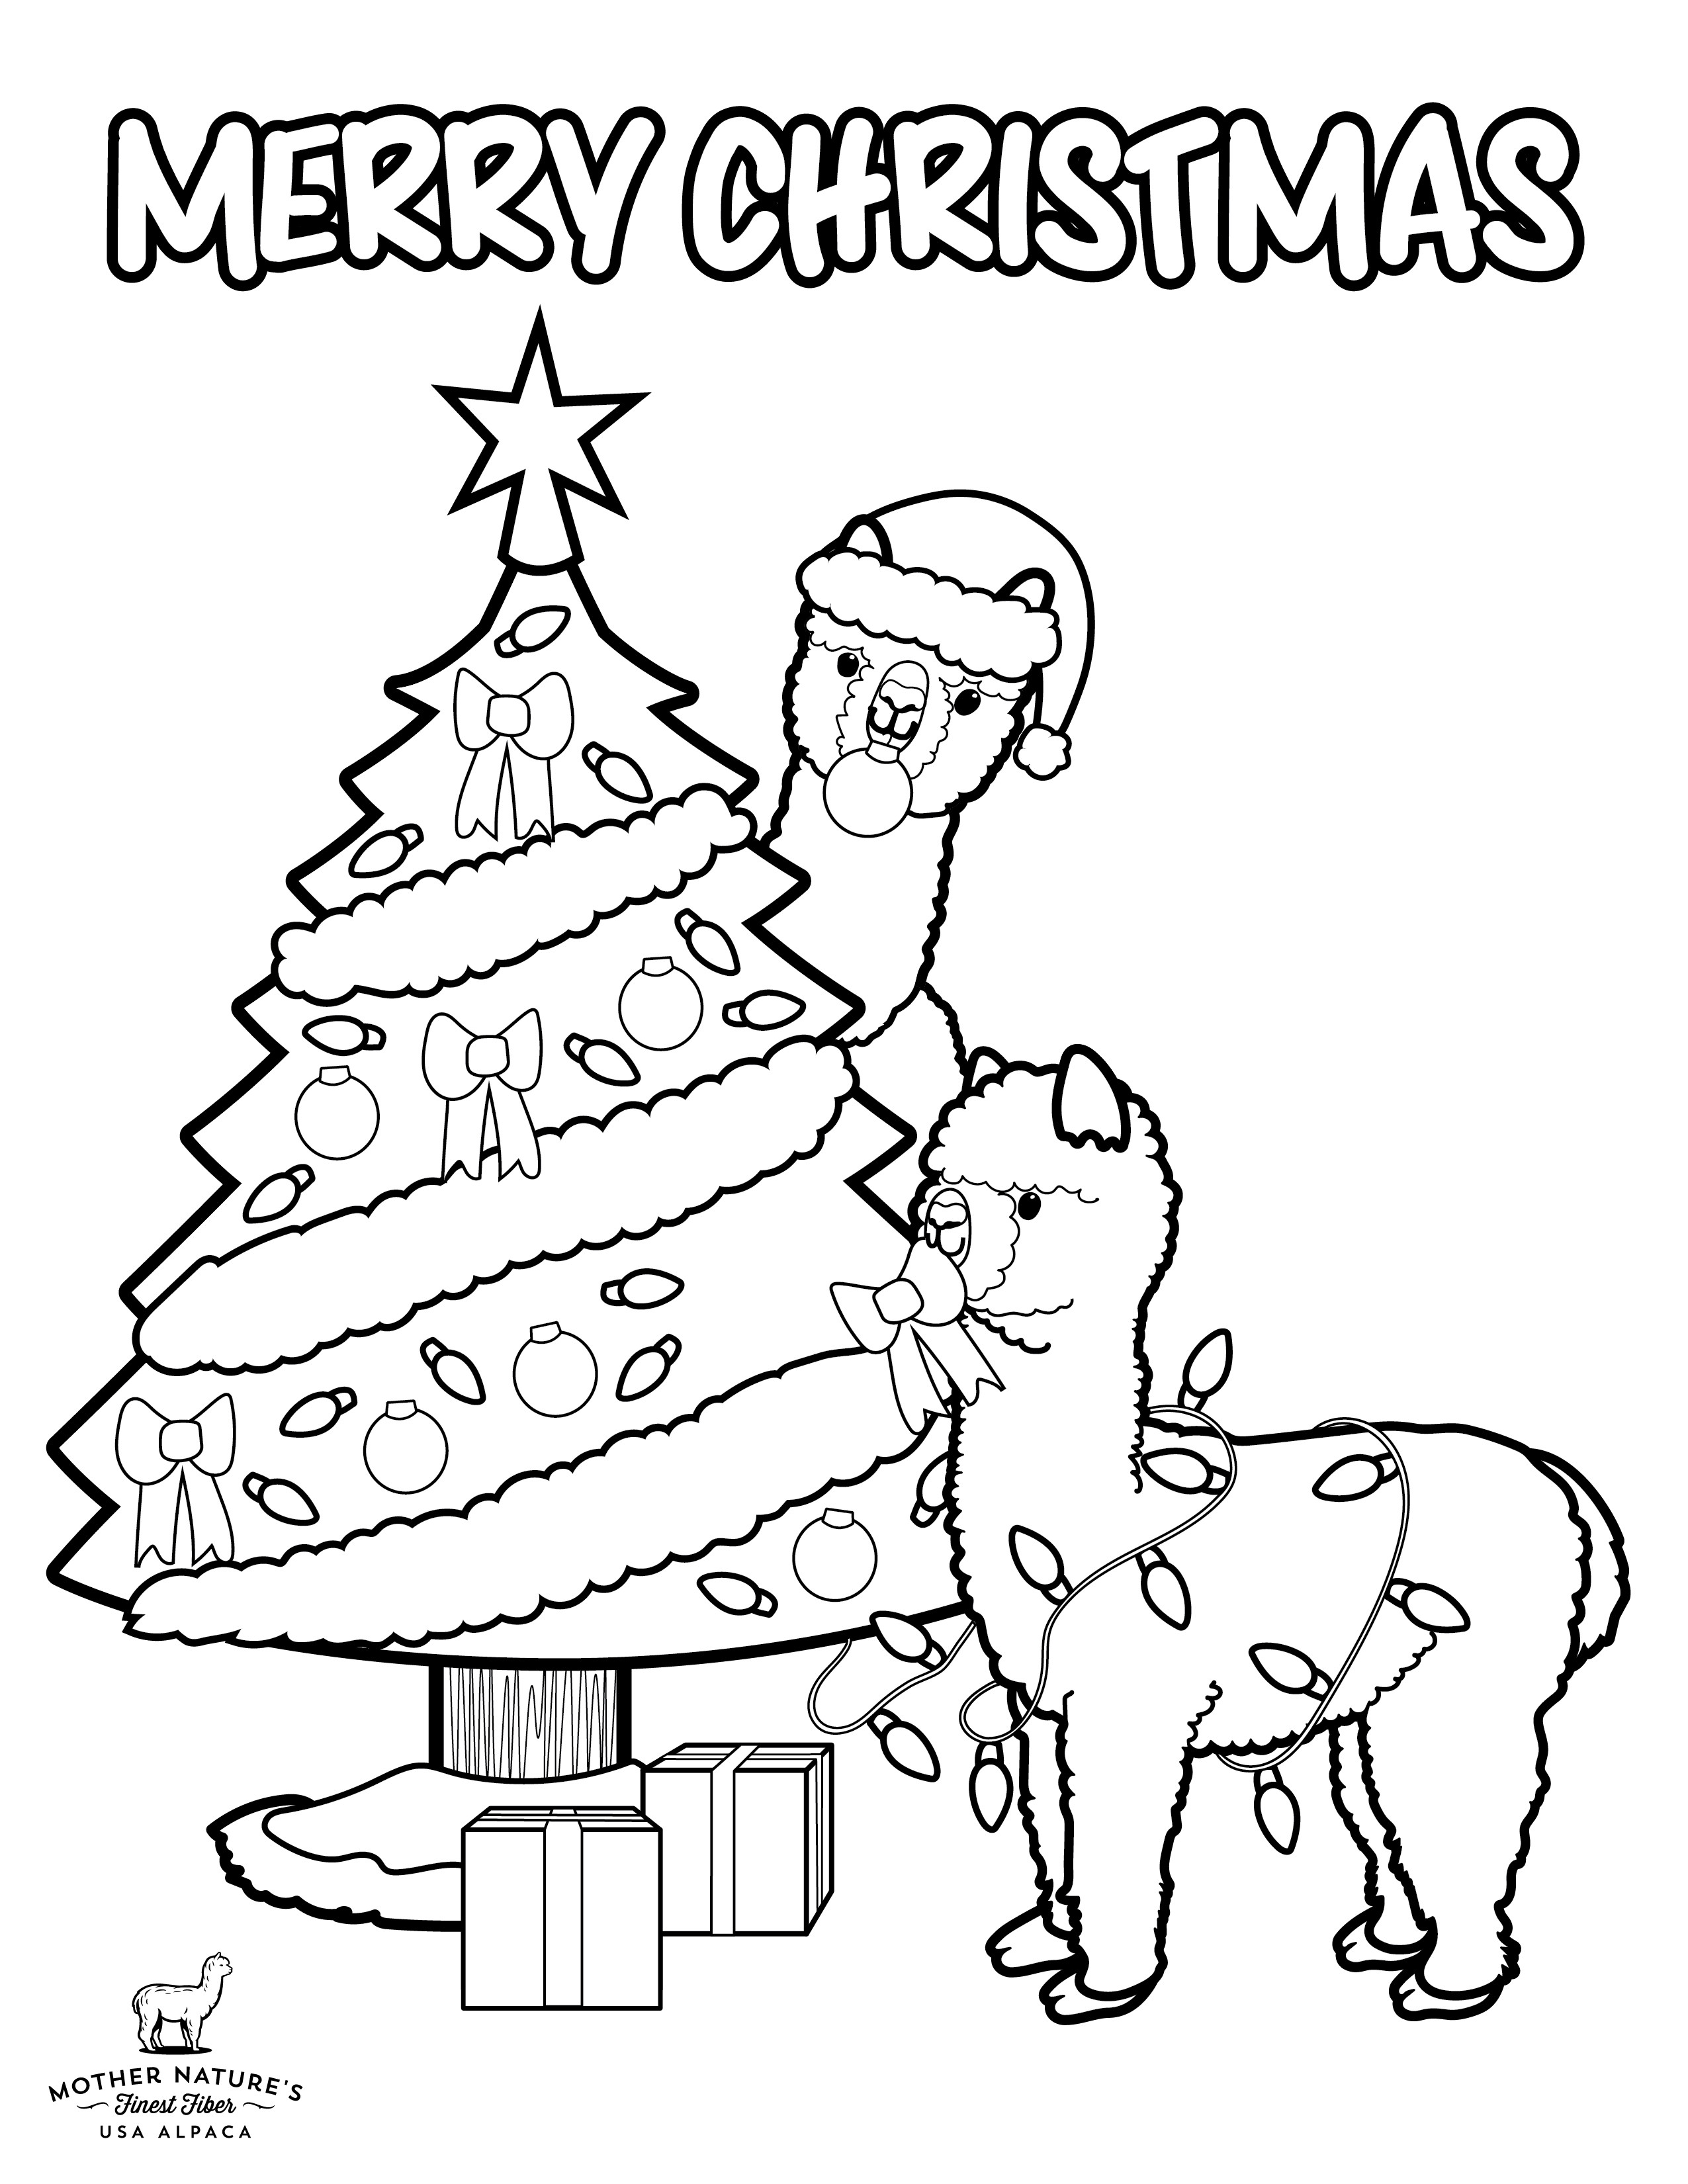 NEW Downloadable Content: Christmas Coloring Page!